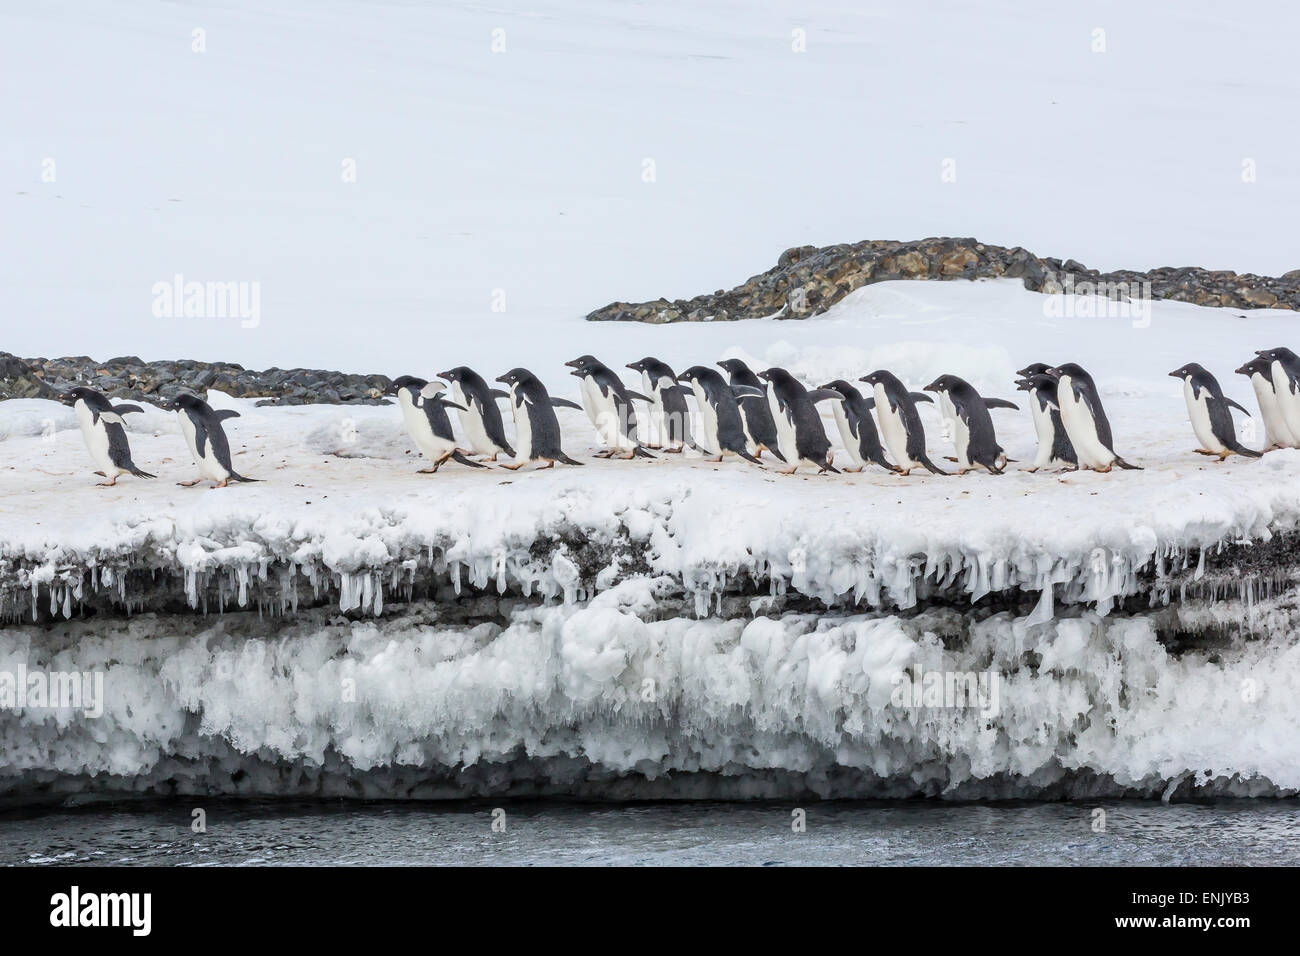 Adelie penguins (Pygoscelis adeliae) at breeding colony at Brown Bluff, Antarctica, Southern Ocean, Polar Regions Stock Photo